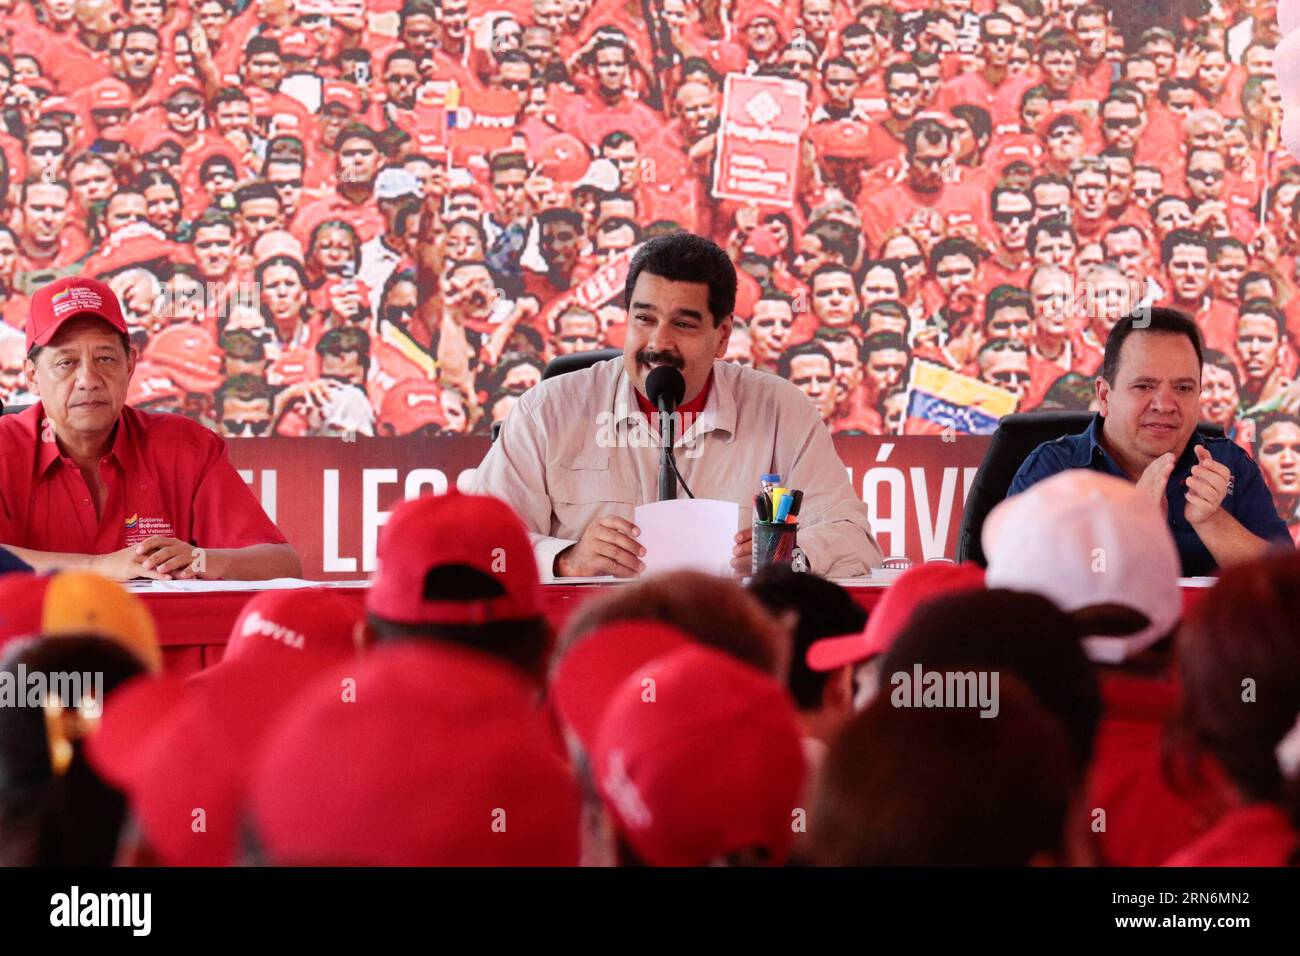 Image provided by Venezuela s Presidency shows Venezuelan President Nicolas Maduro delivering a speech during the meeting with workers of Orinoco Belt, at the Morichal Oilfield, state of Monagas, Venezuela, on Aug. 1, 2015. According to local press, Maduro praised on Saturday the Orinoco Belt as the most important project for the economic future and the integral development of Venezuela with a production of 1,326,000 daily barrels of oil, during a day of work in the Morichal Oilfield concerning the plan of the relaunch and repositioning of the plan of integral development of the Orinoco Belt. Stock Photo